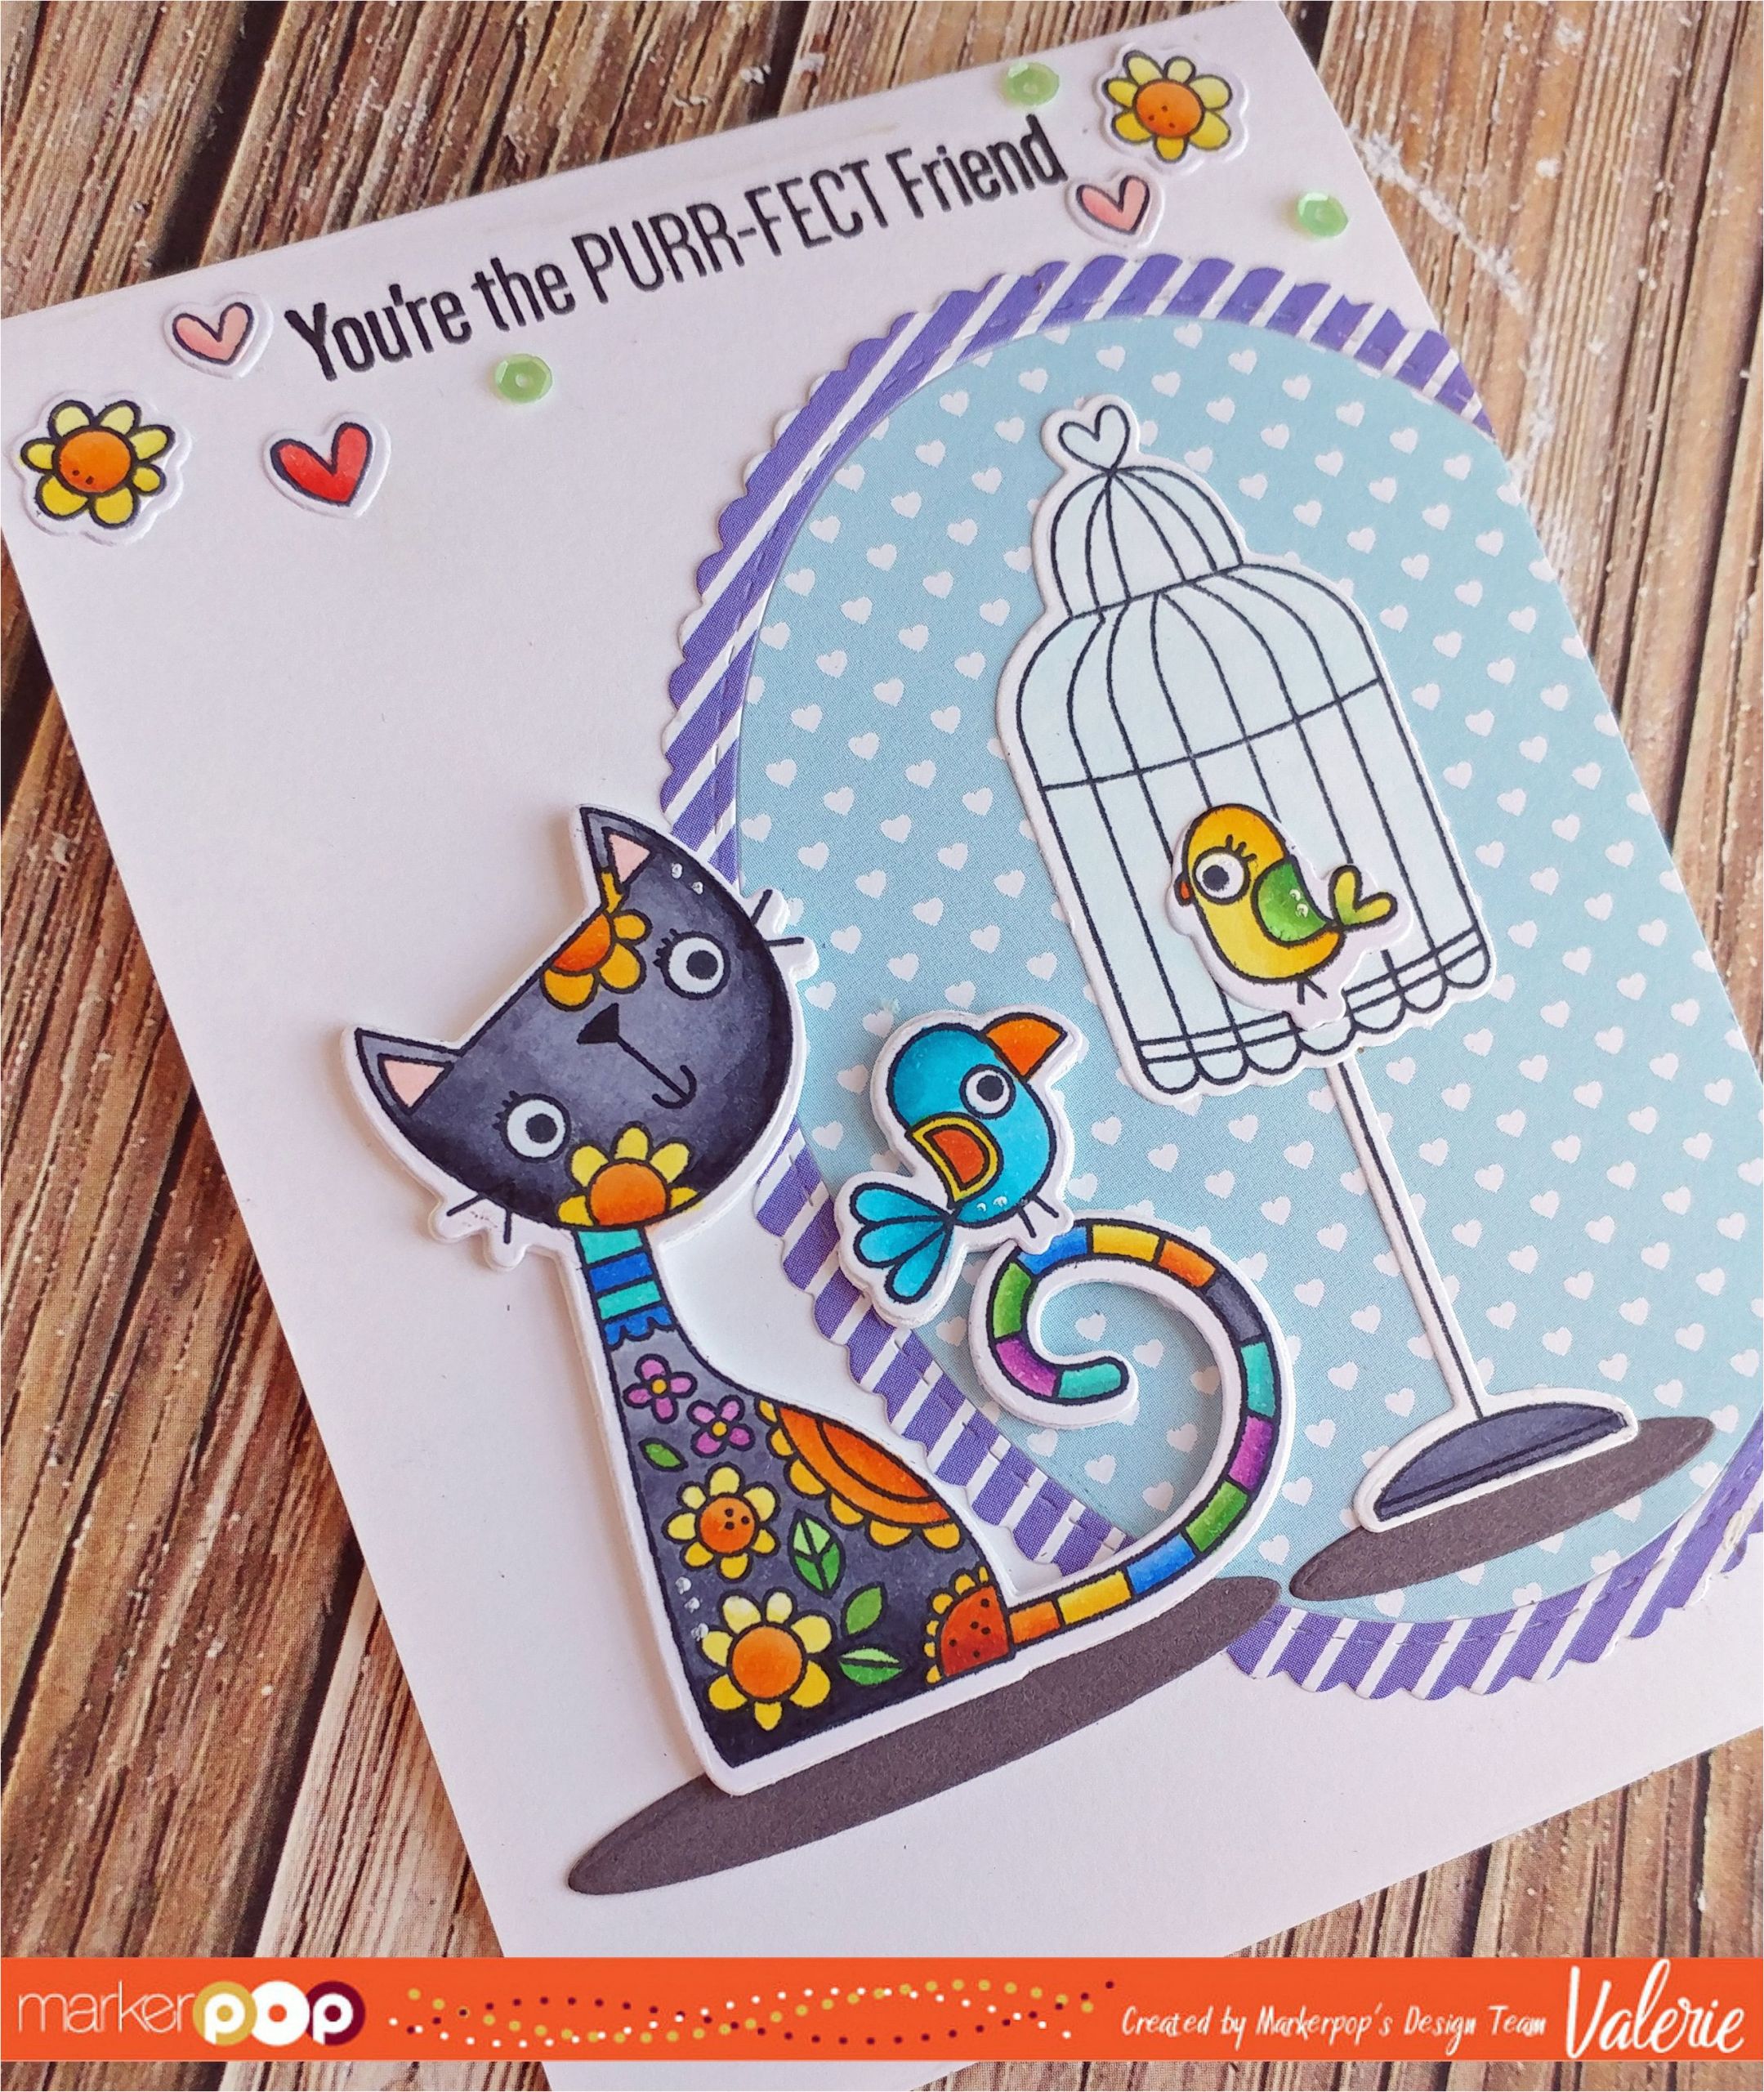 Handmade Card for A Friend Purr Fect Friend Cards for Friends Greeting Cards